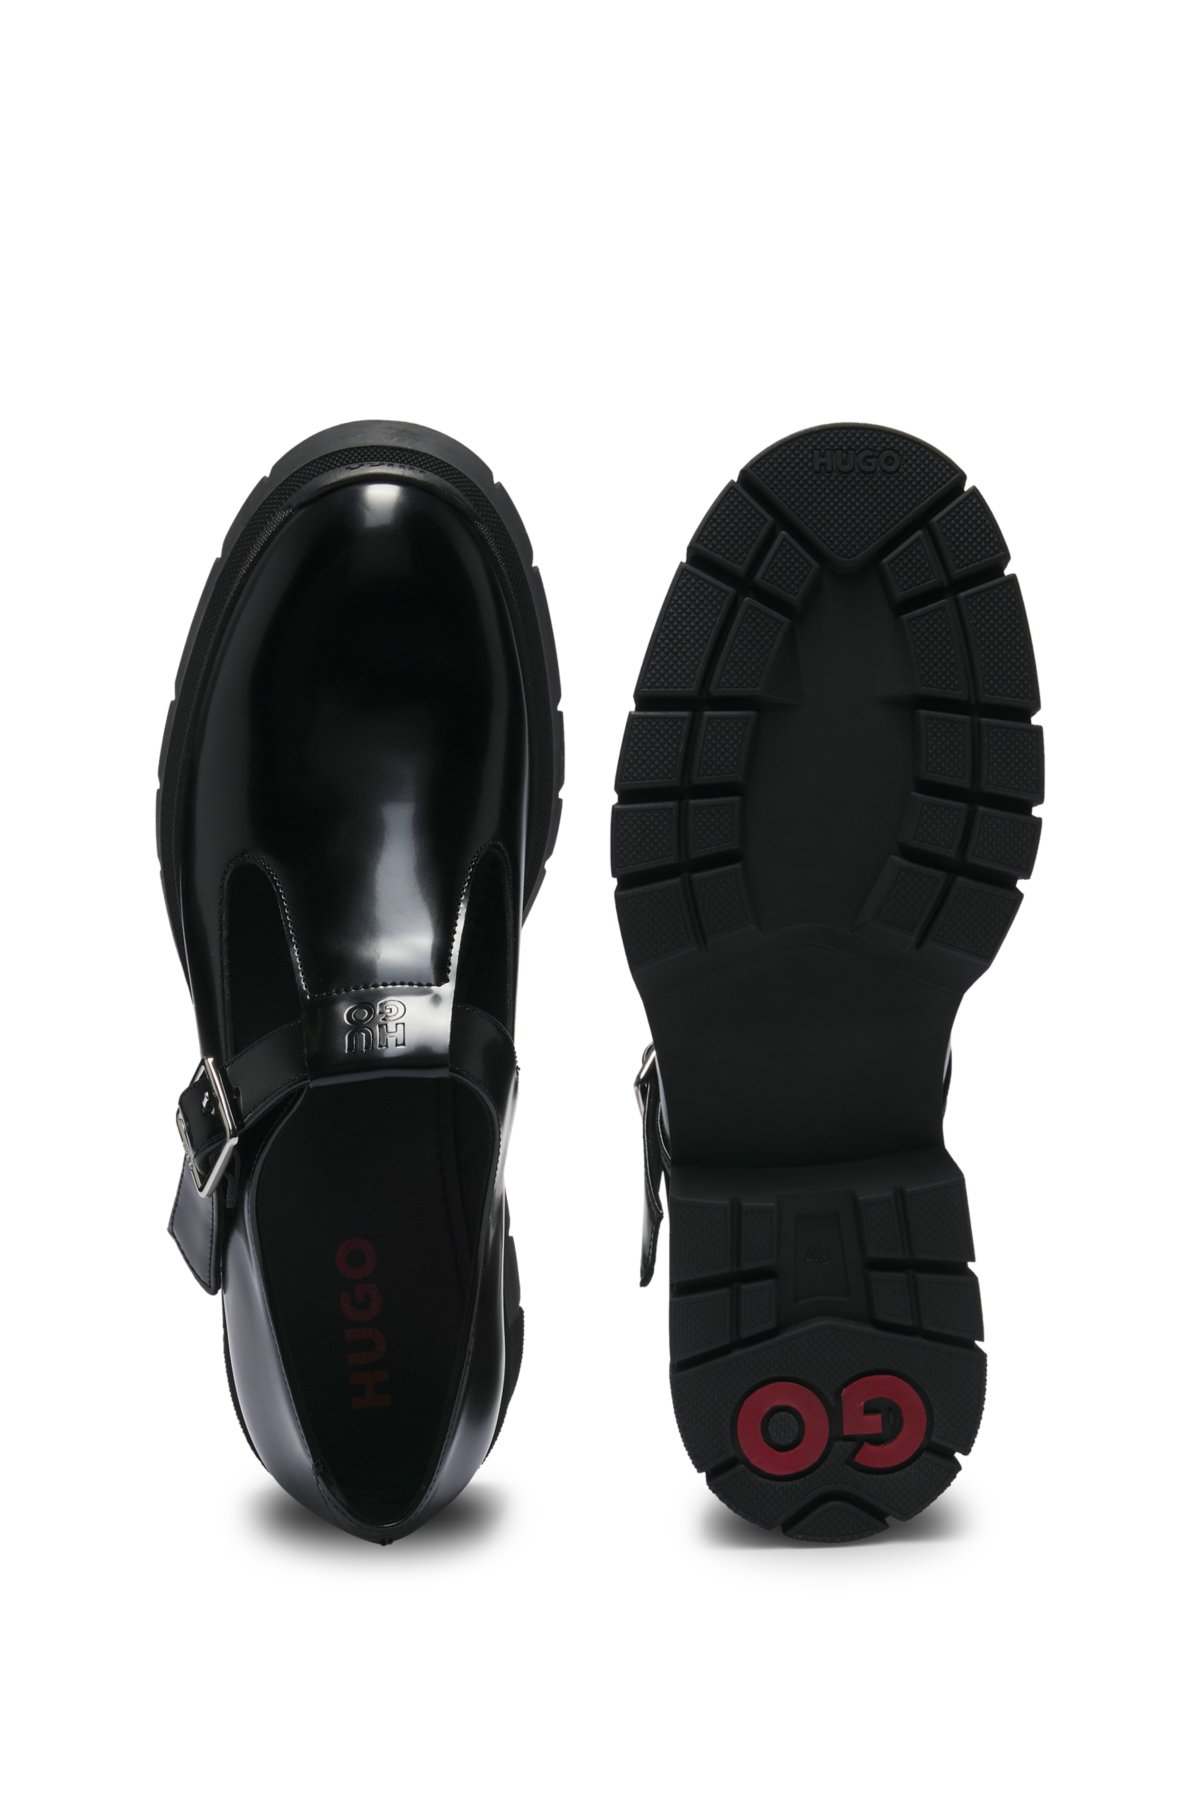 Mary-Jane shoes in leather with stacked logo, Black